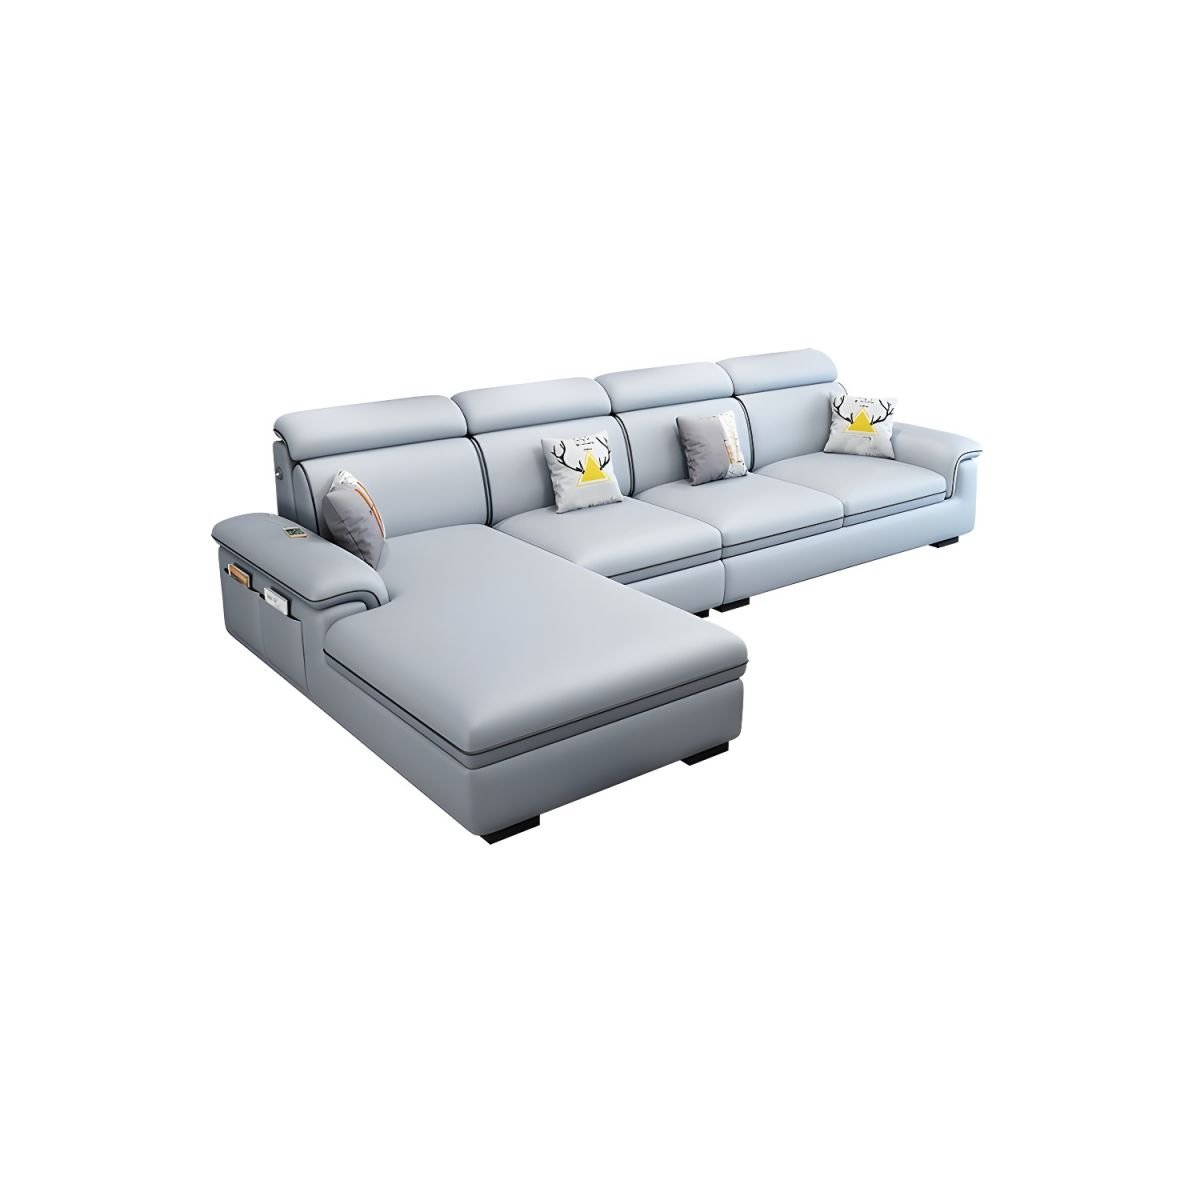 Wooden Modern 9 Feet L-Shape Sectionals No Distressing Seats 4 Storage Included Sofa Chaise - Tech Cloth Light Blue Left